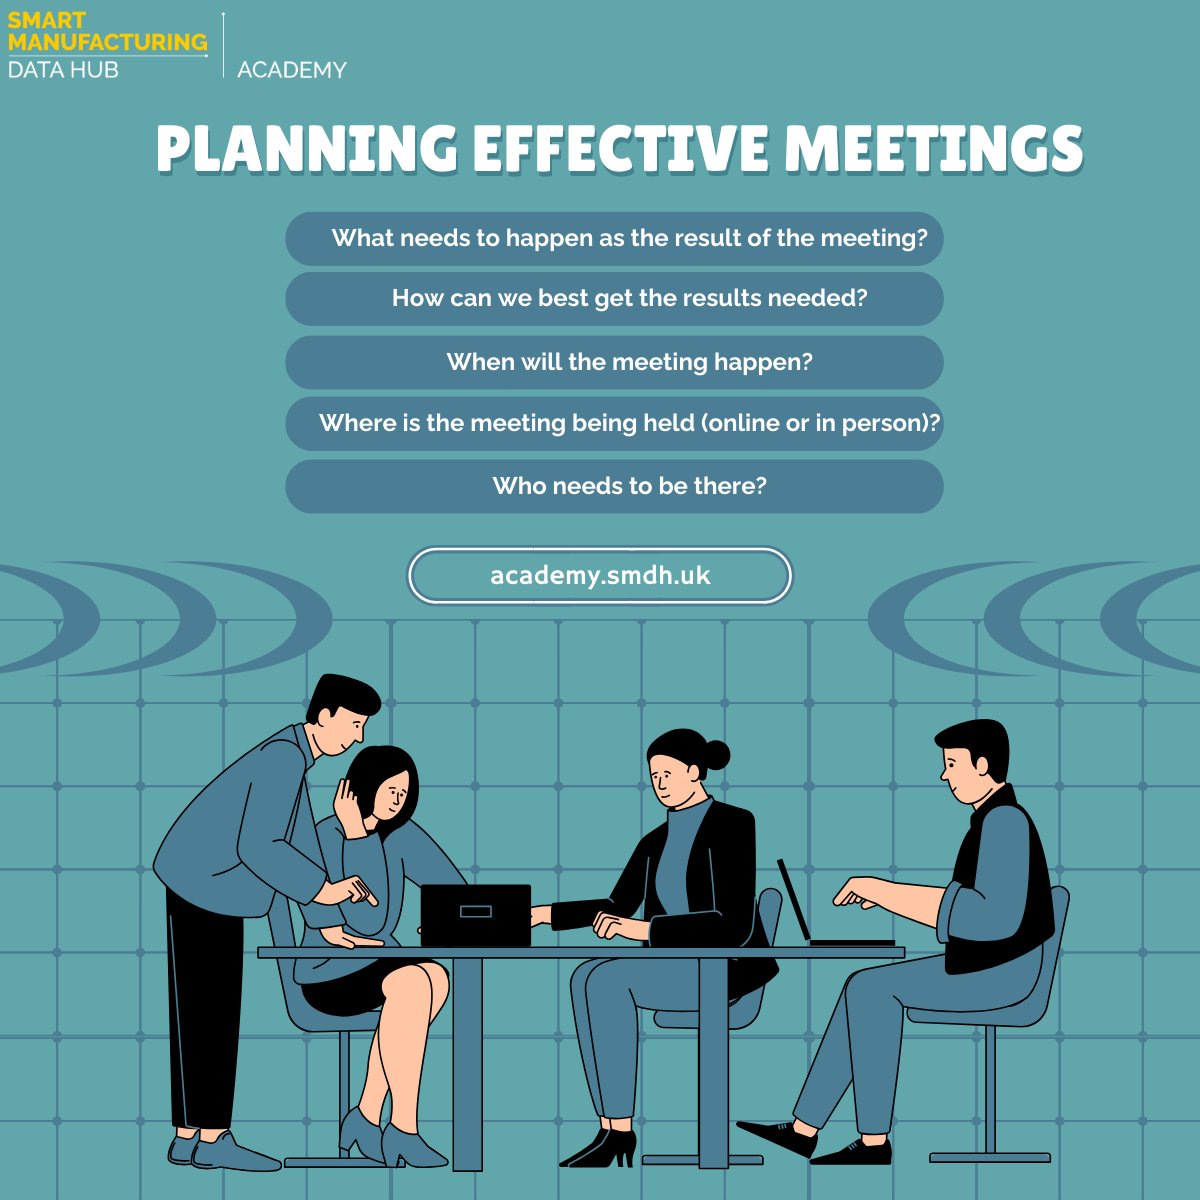 Explore a diverse range of topics including effective meeting management in our First Line Leader course! 🚀 Join SMDH Academy and enroll in First Line Leader today! #LeadershipSkills #EffectiveMeetings #ContinuousLearning 📝💼